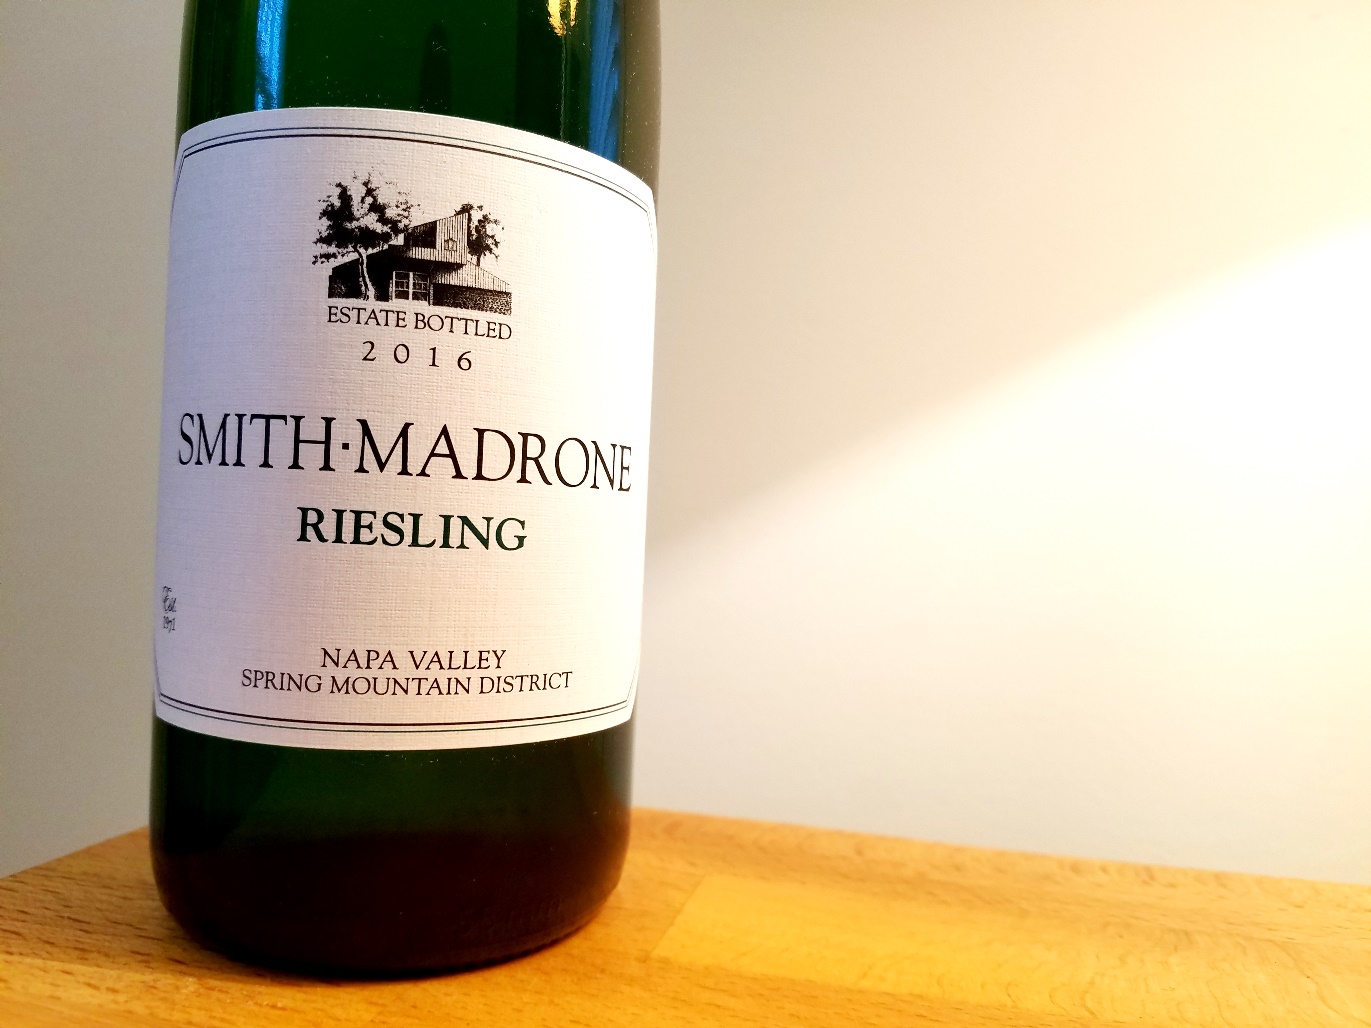 Smith-Madrone Vineyards and Winery, Riesling 2016, Spring Mountain District, Napa Valley, California, Wine Casual